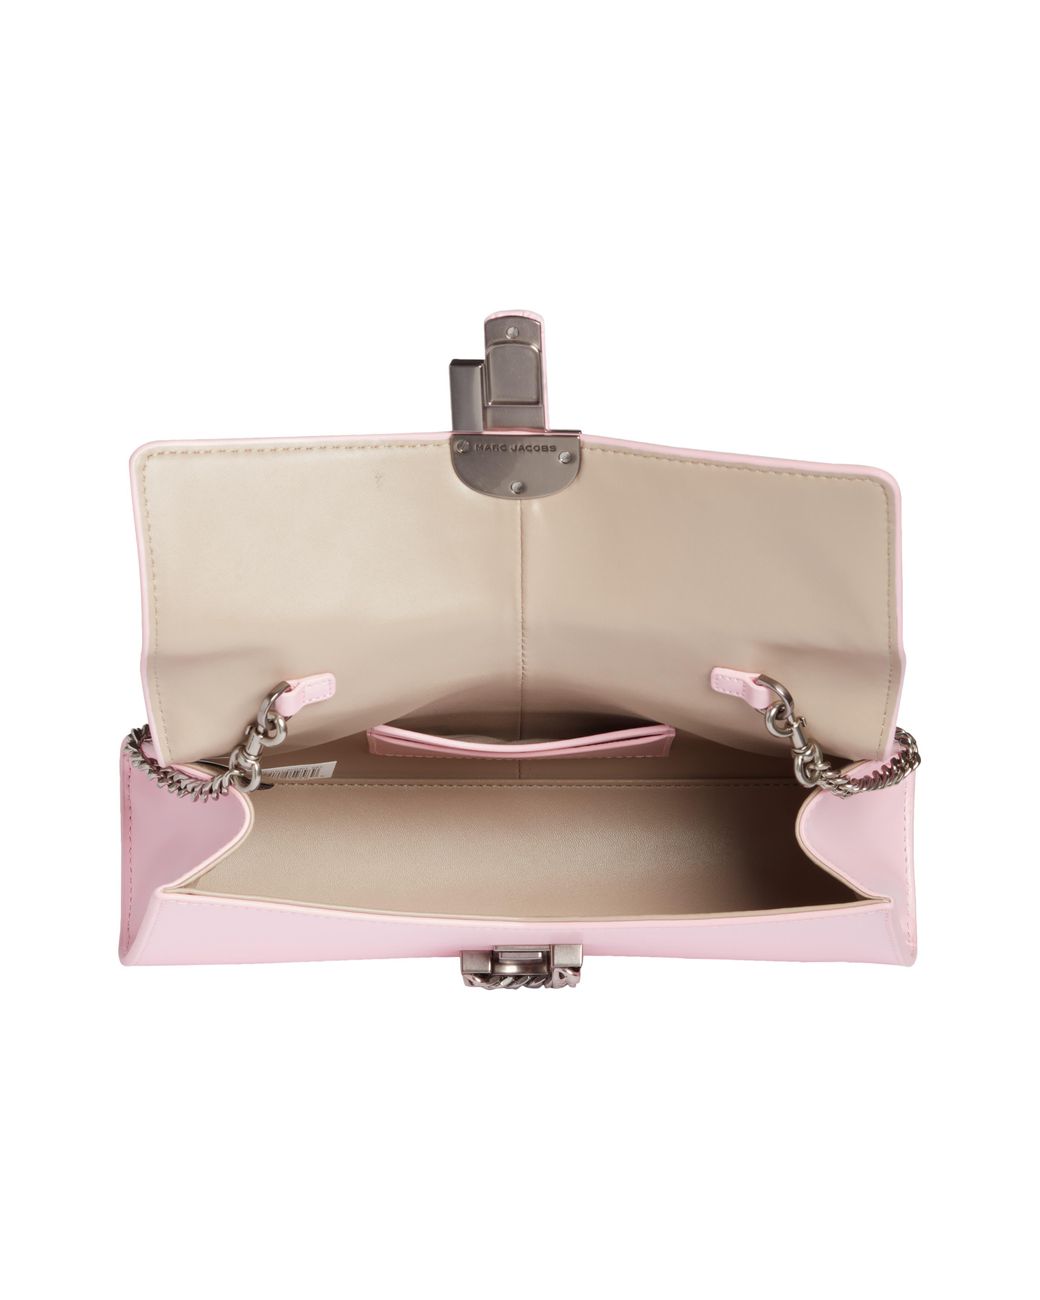 MARC JACOBS CLUTCH 'THE ST. MARC CONVERTIBLE' – Baltini